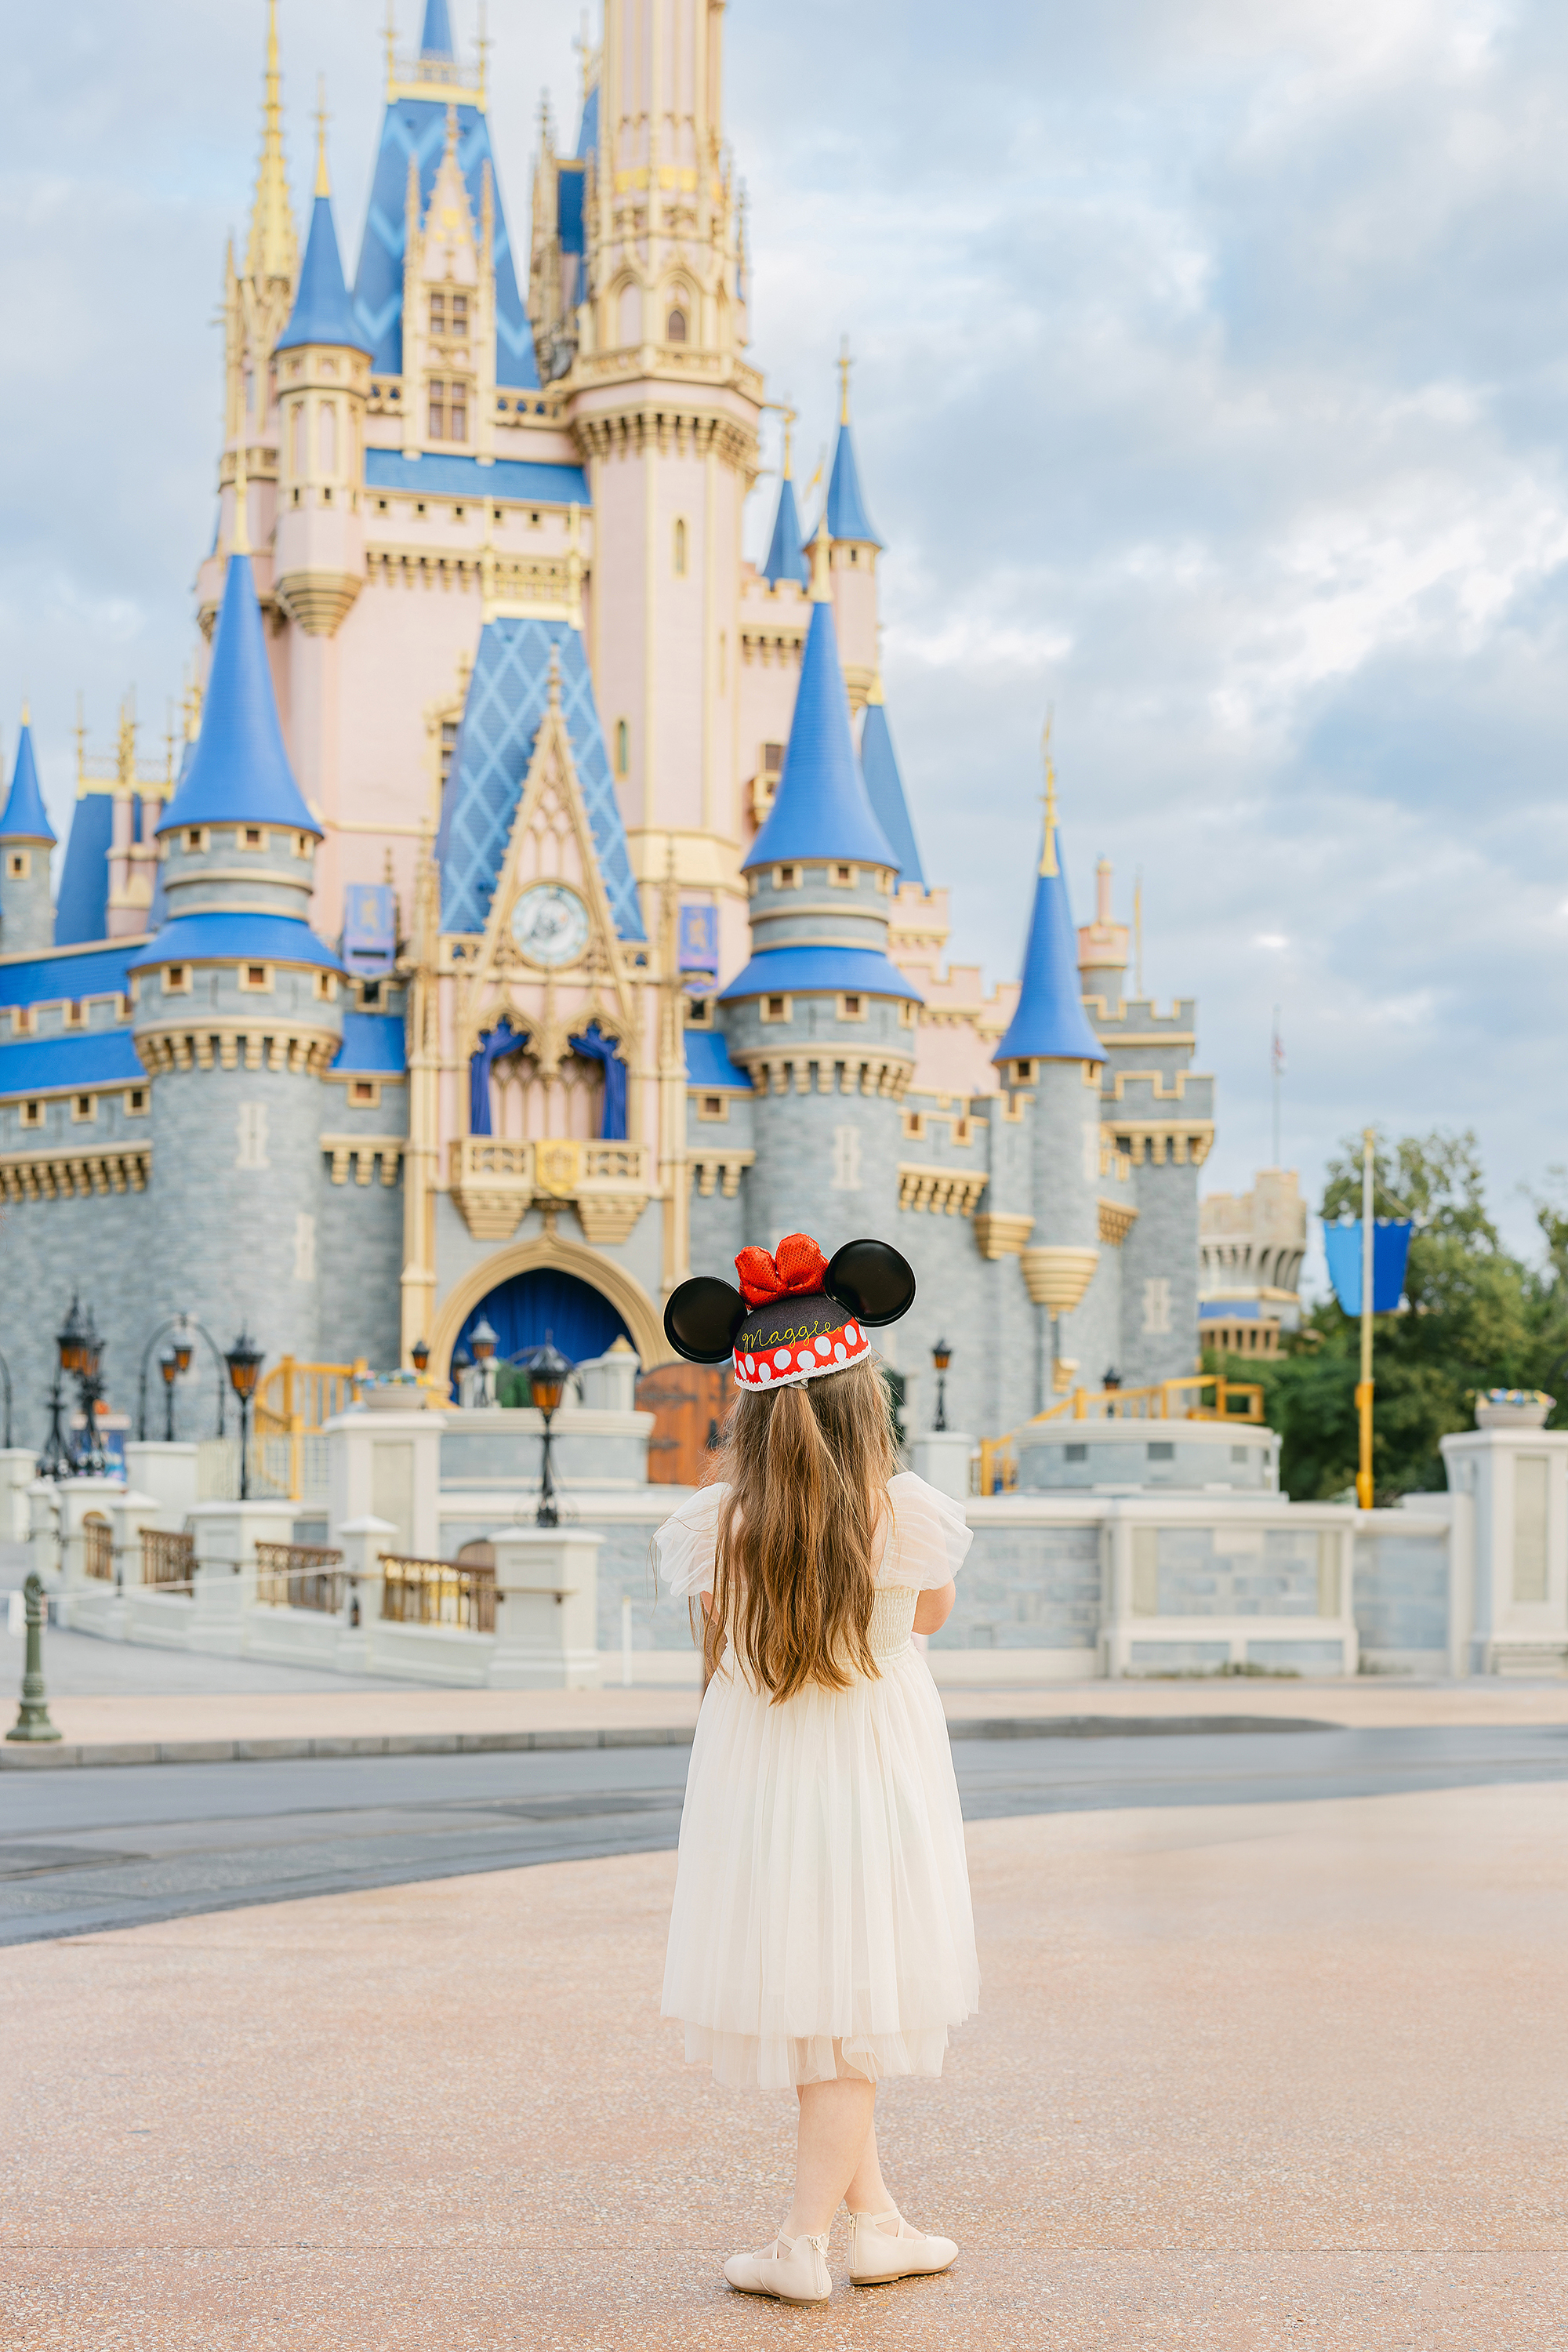 A little girl dressed in a cream tulle dress wears a Mickey hat and looks out at Cinderella's Castle.